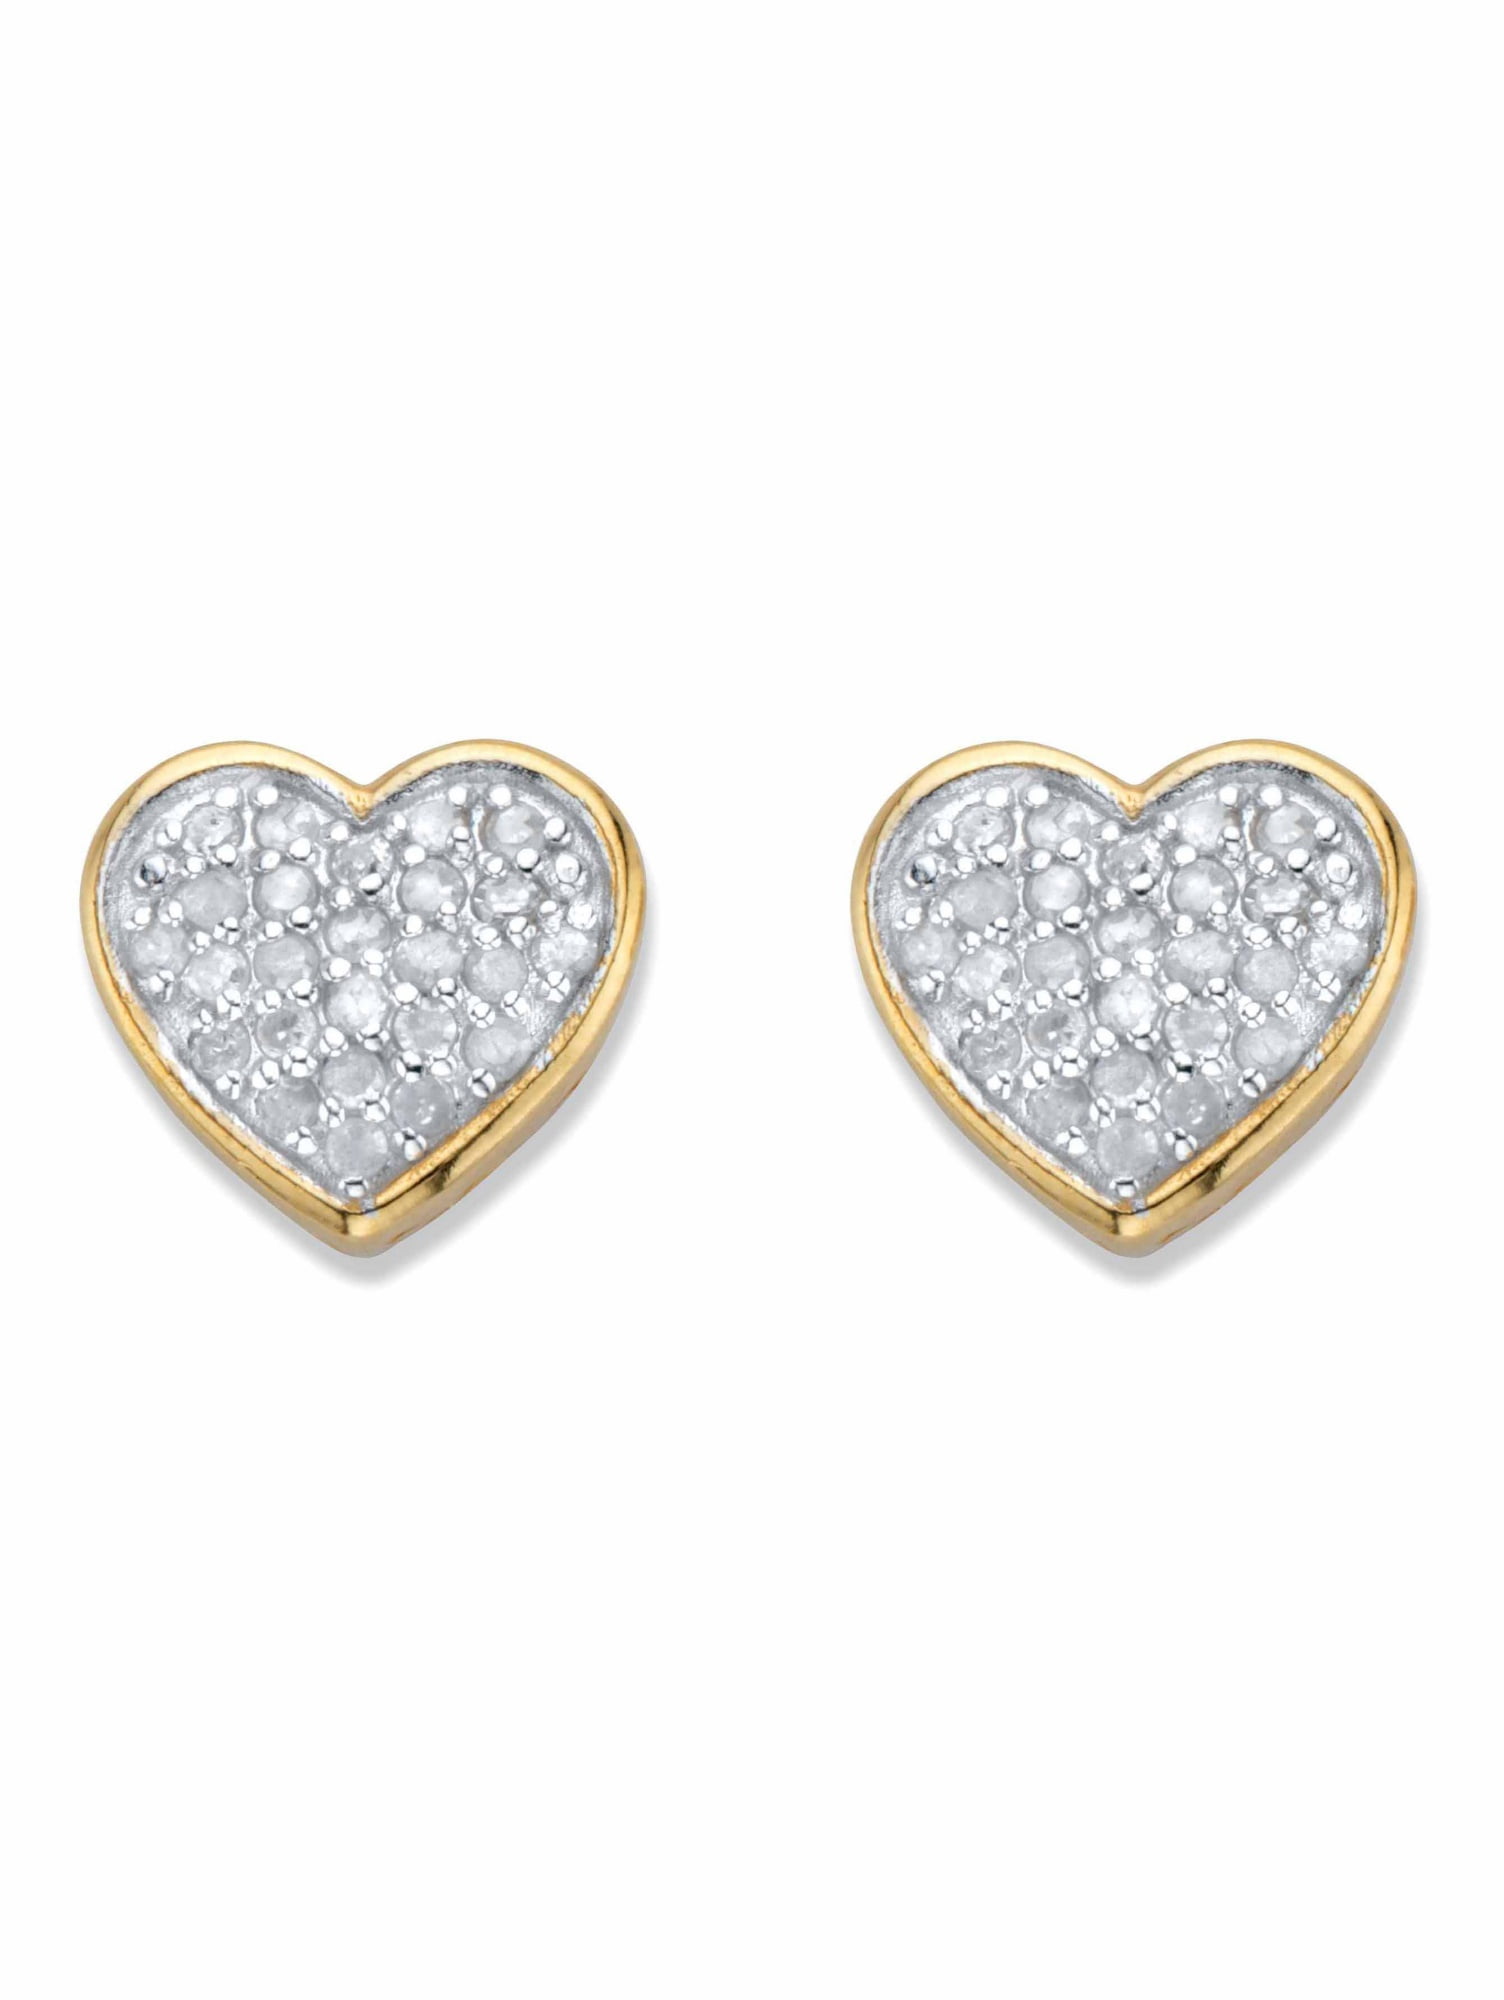 Details about   1/4 ct Crystal Heart Halo Stud Earrings in Sterling Silver 